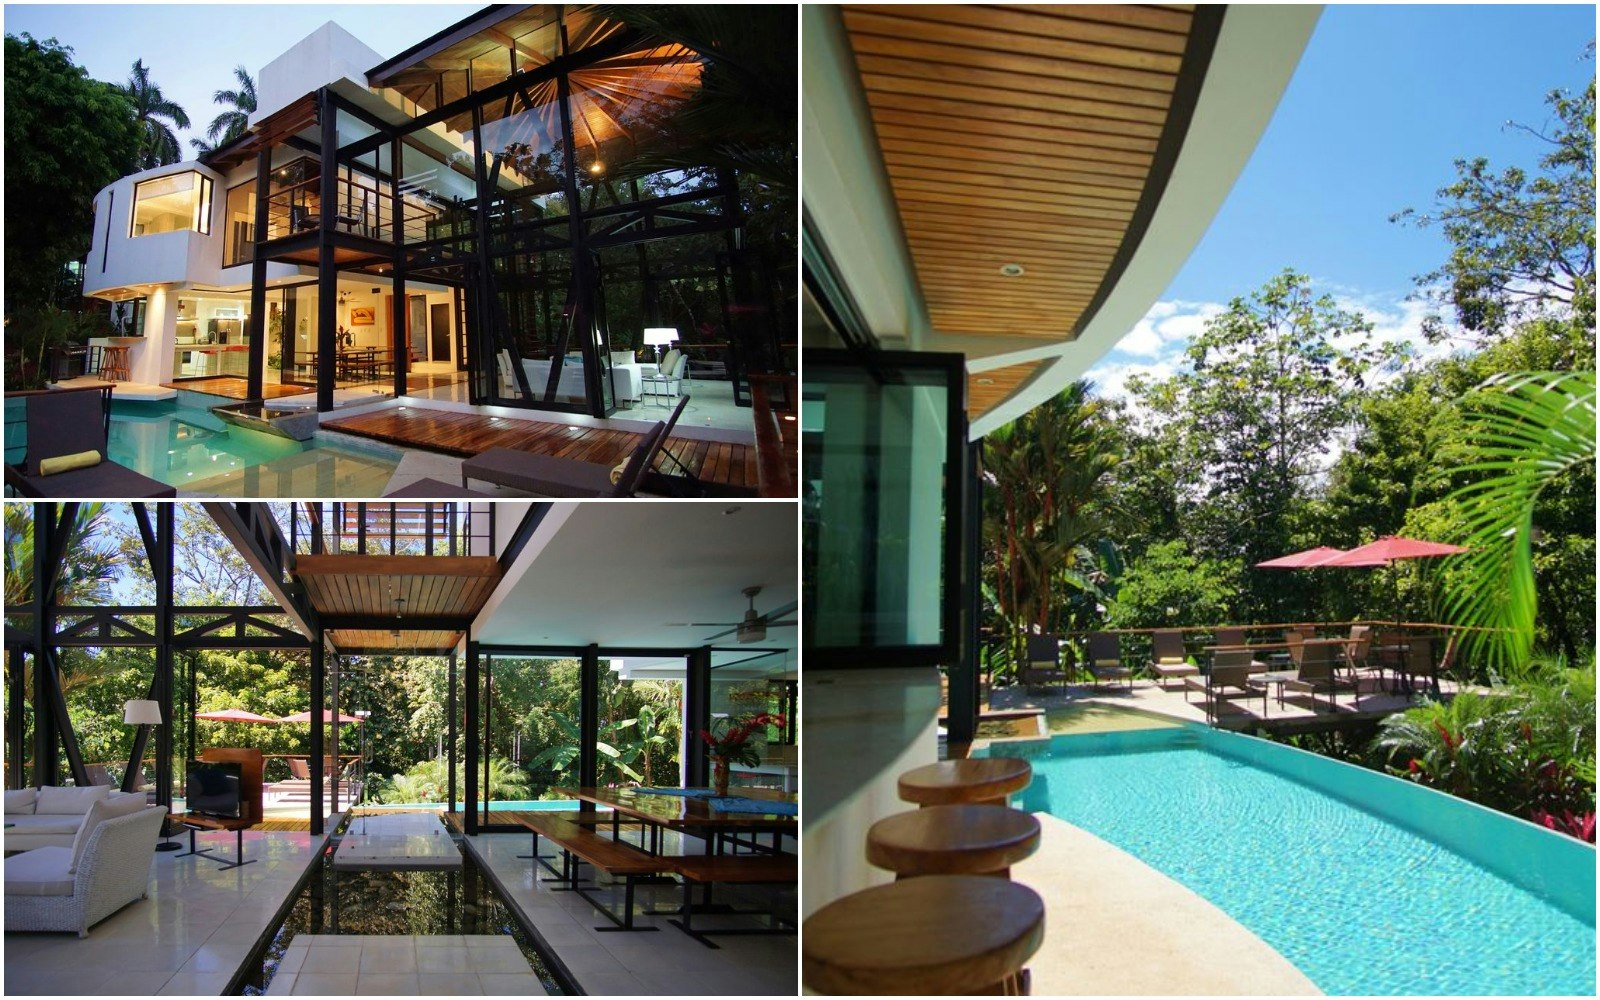 A glass home with a swimming pool in Costa Rica